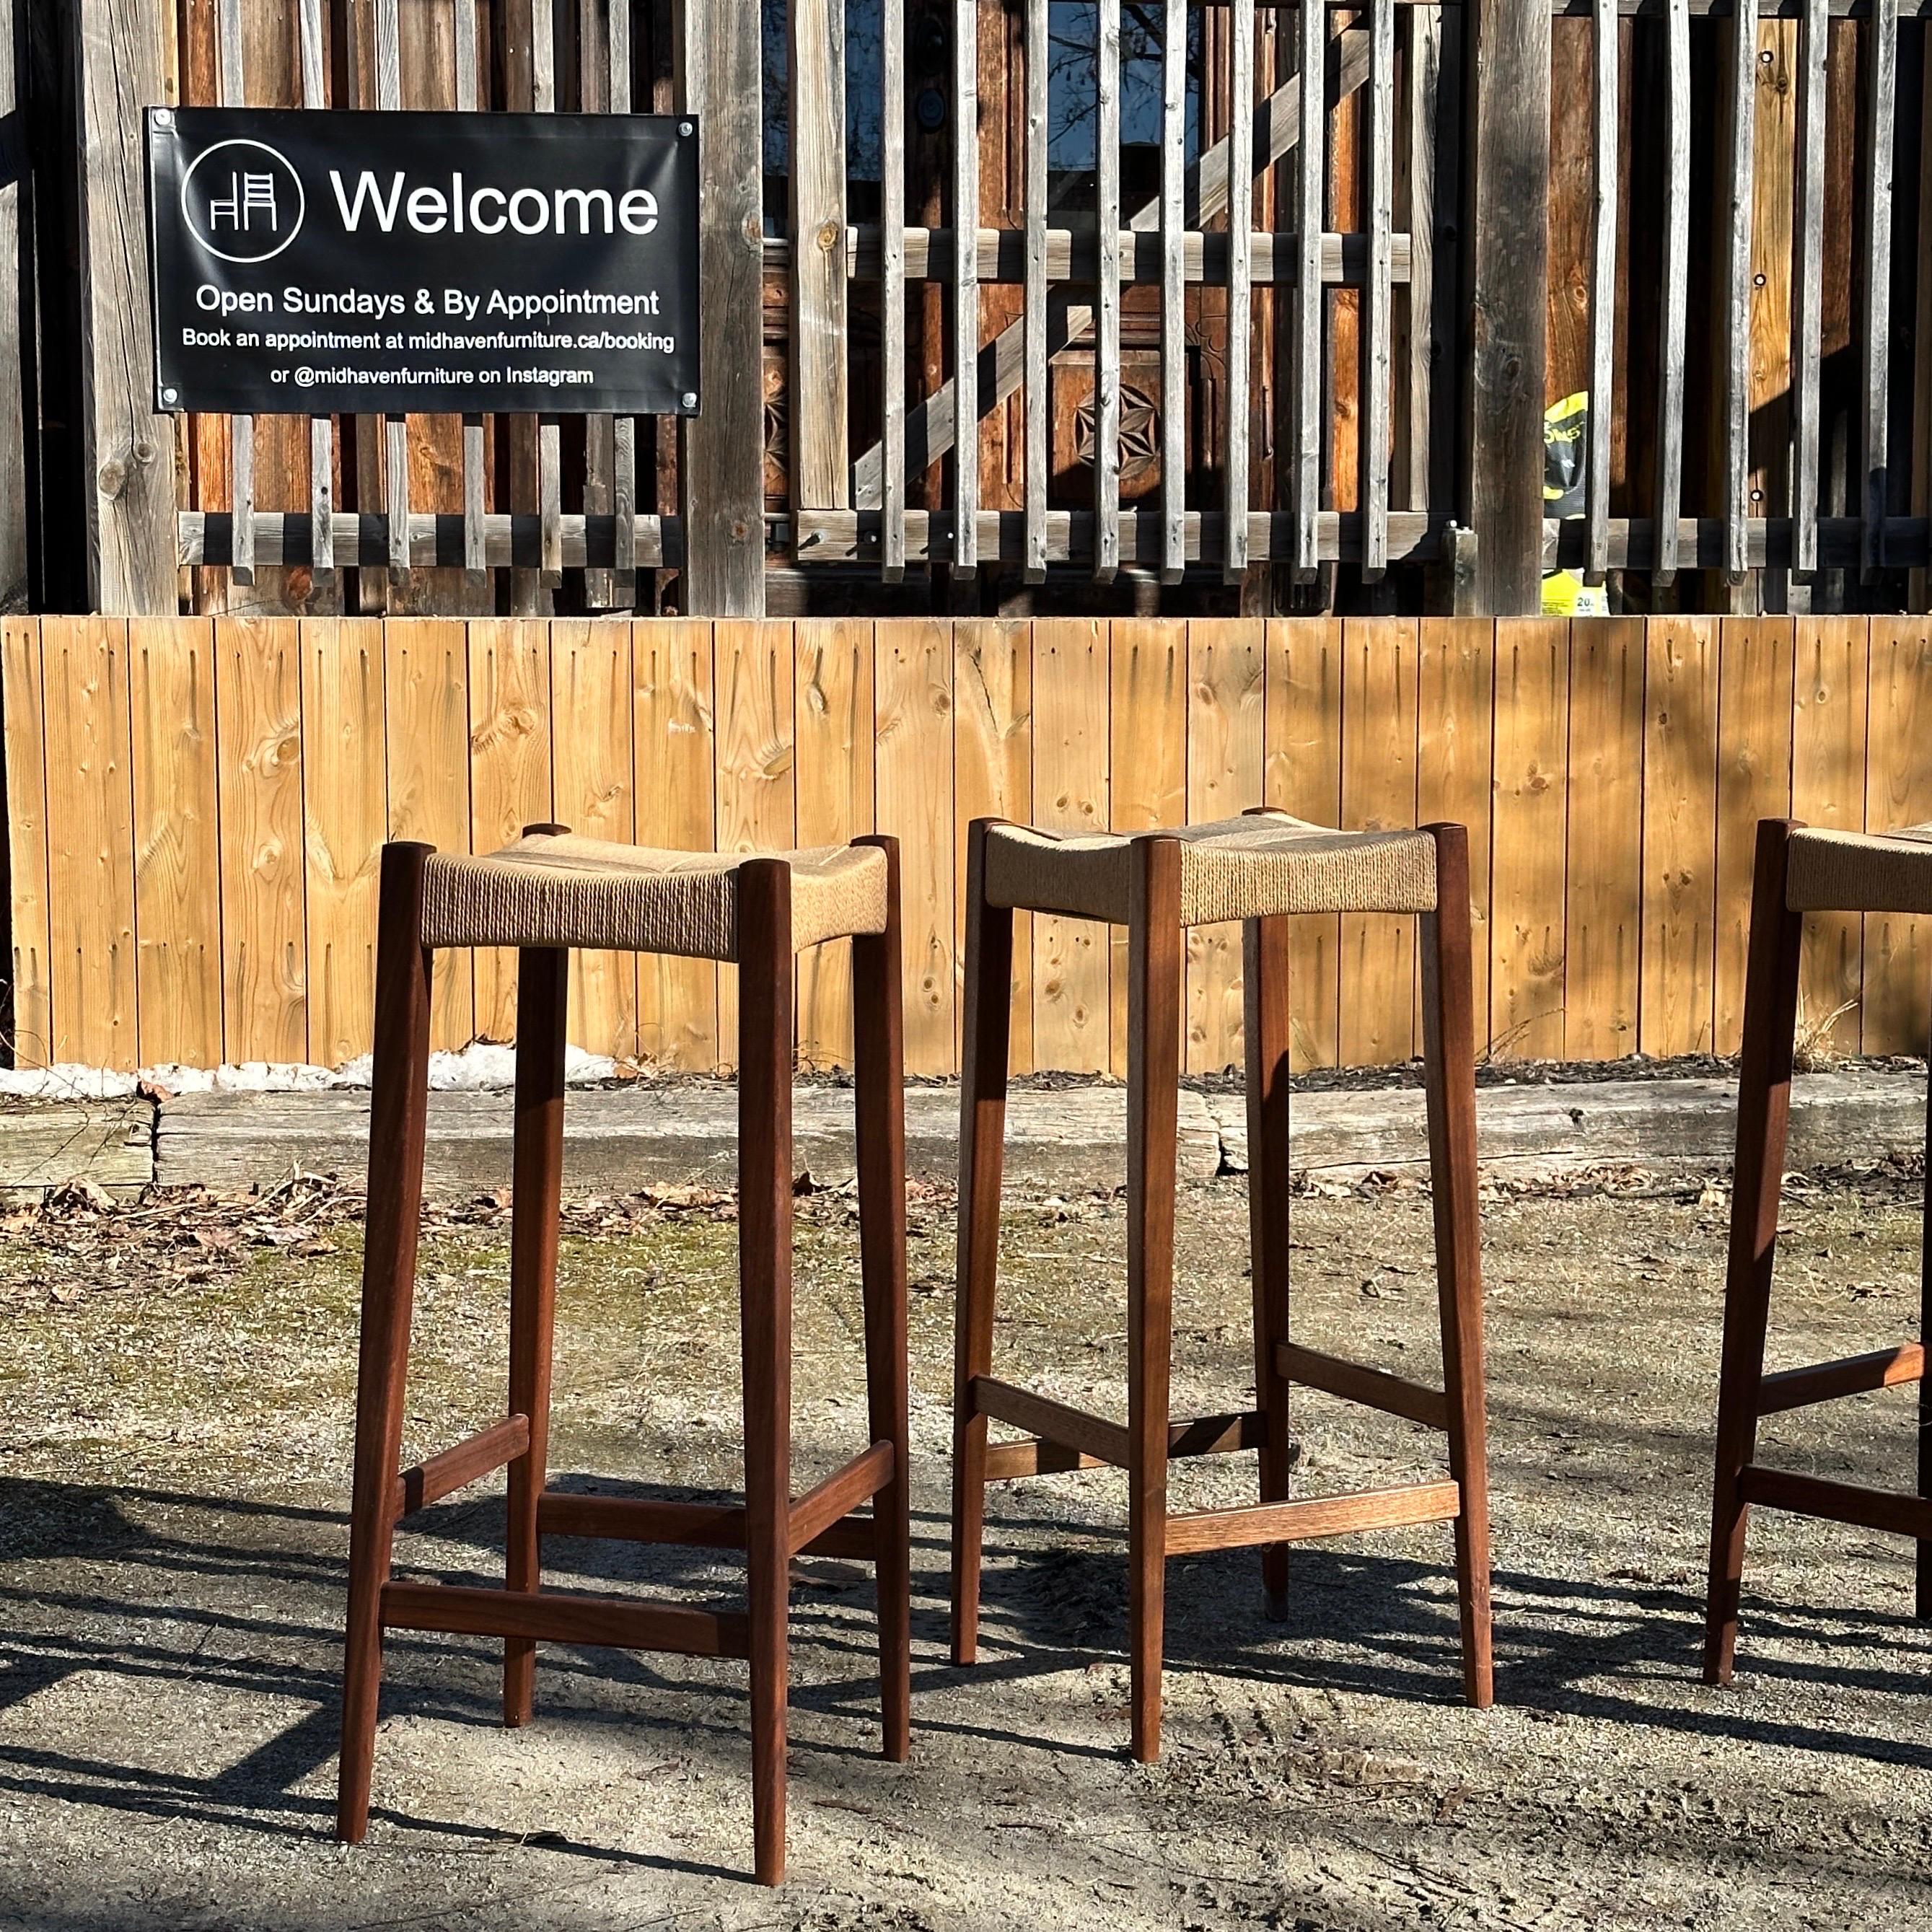 Condition: Great Vintage Condition - minor patina to paper cording

Dimensions: 14” L x 14” D x 30” H

Description: A vintage teak bar stool set, attributed to John Stene for Brunswick Manufacturing Company in Toronto, circa 1950s. Likely designed